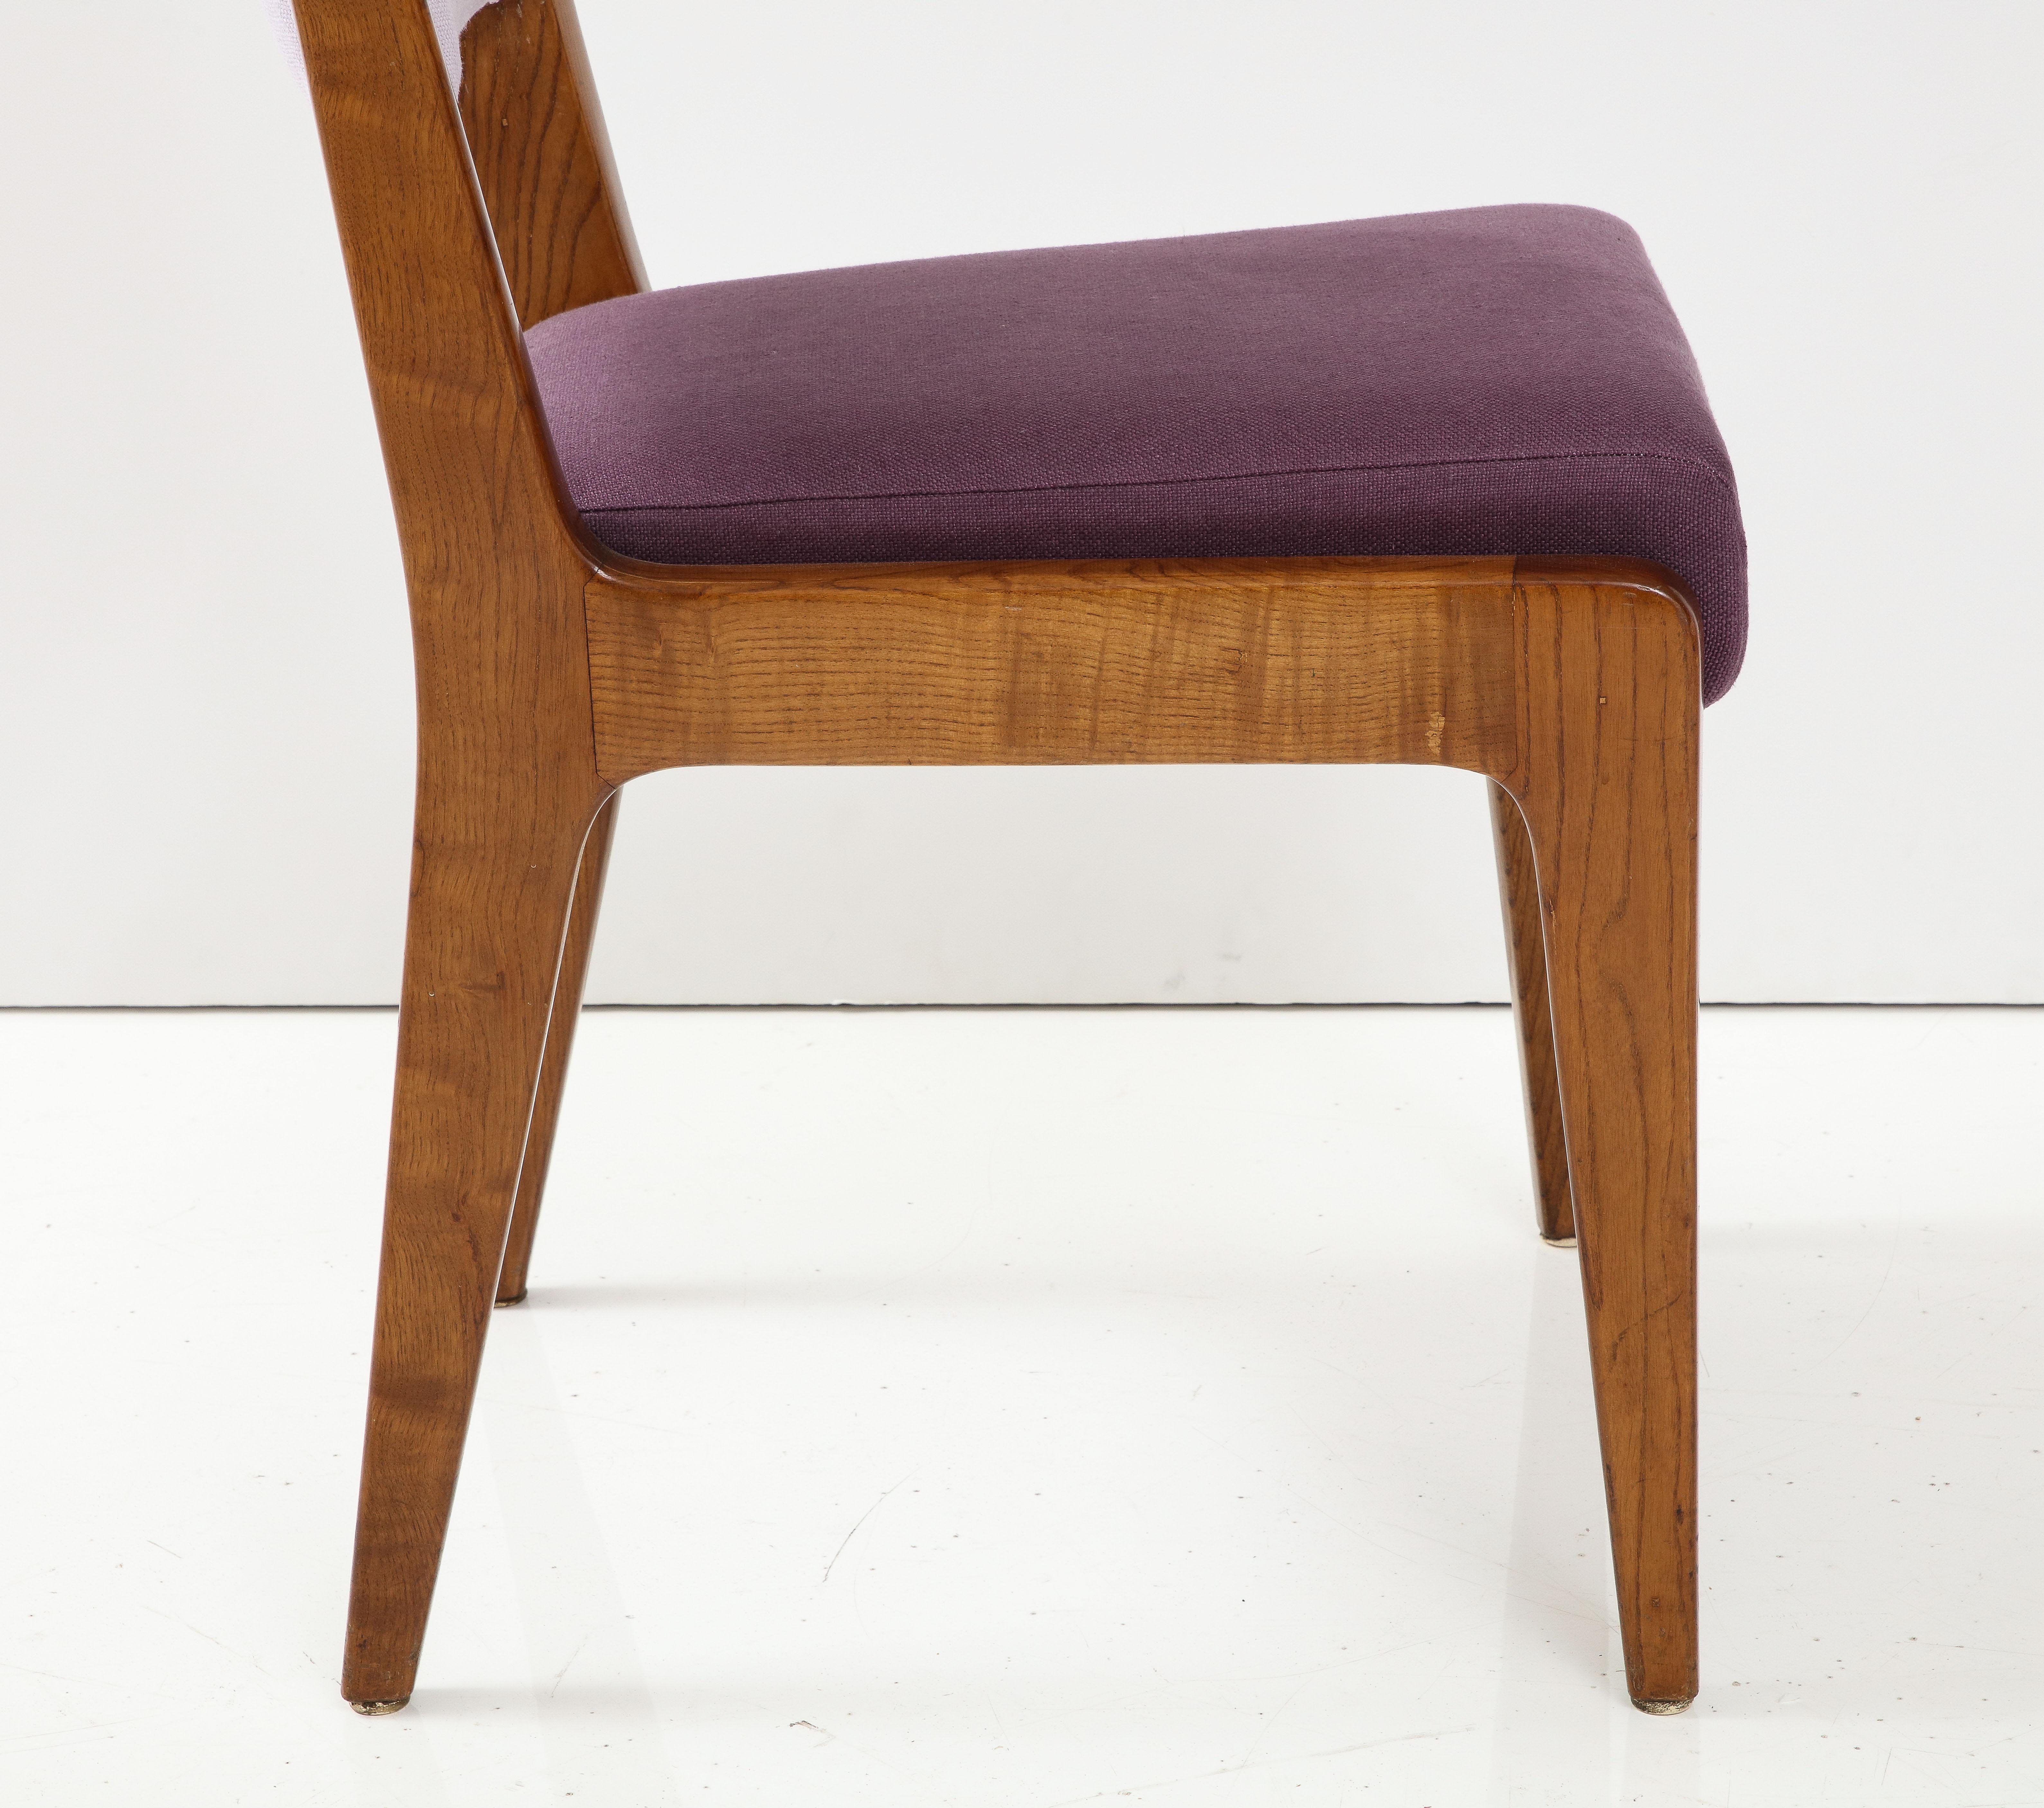 Linen Upholstered Oak Chair by Gio Ponti, Italy, circa. 1950s For Sale 3